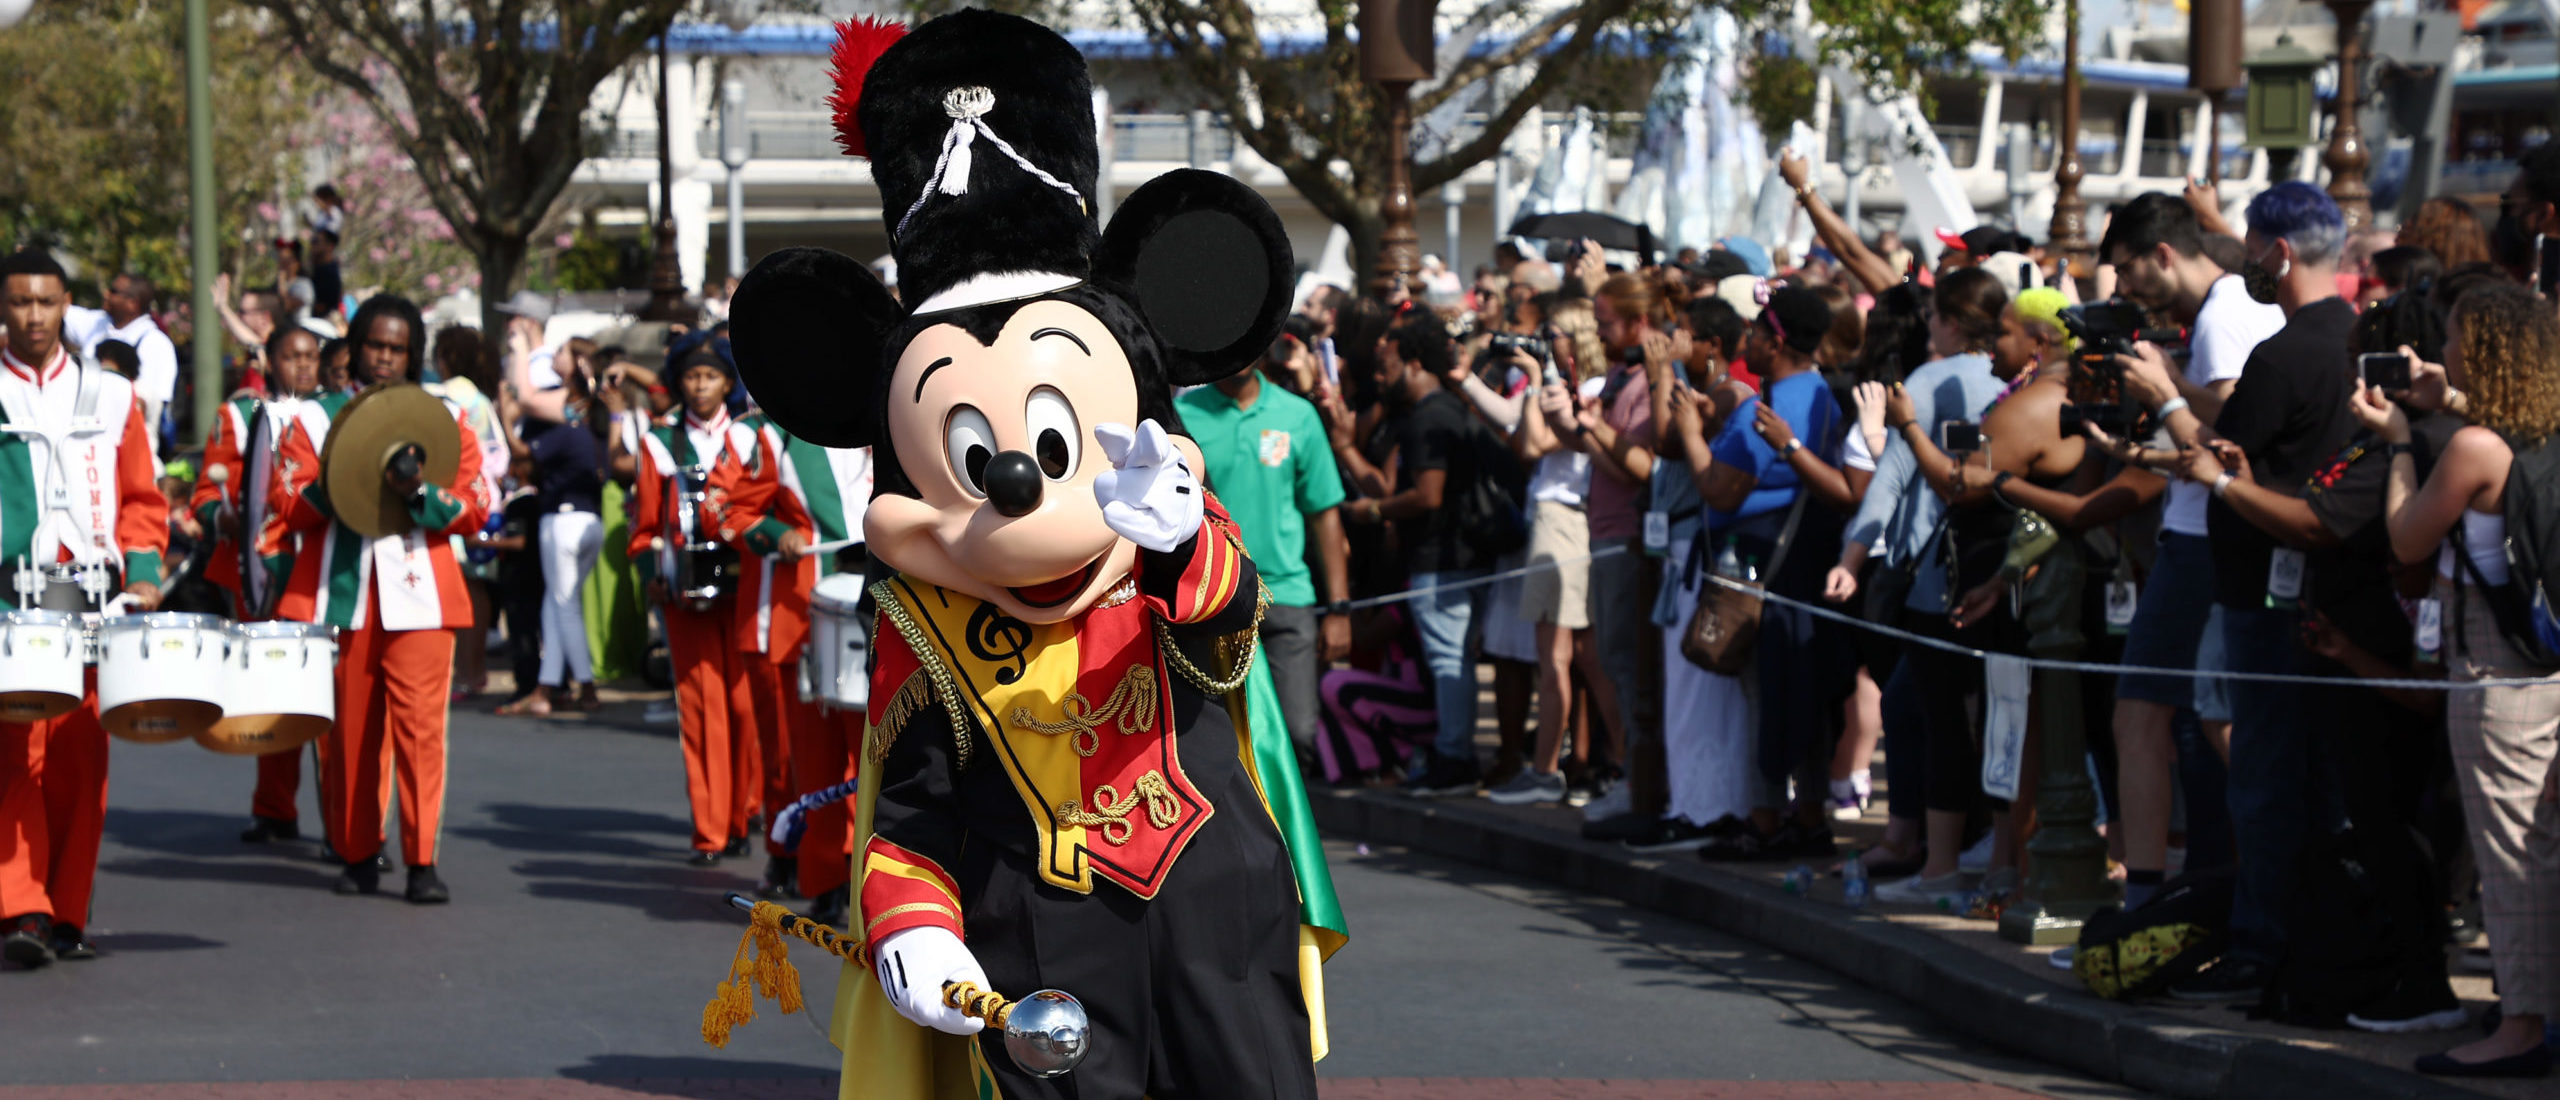 Mickey Mouse waves to fans during a parade at Walt Disney World Resort on March 03, 2022 in Lake Buena Vista, Florida. (Photo by Arturo Holmes/Getty Images for Disney Dreamers Academy)